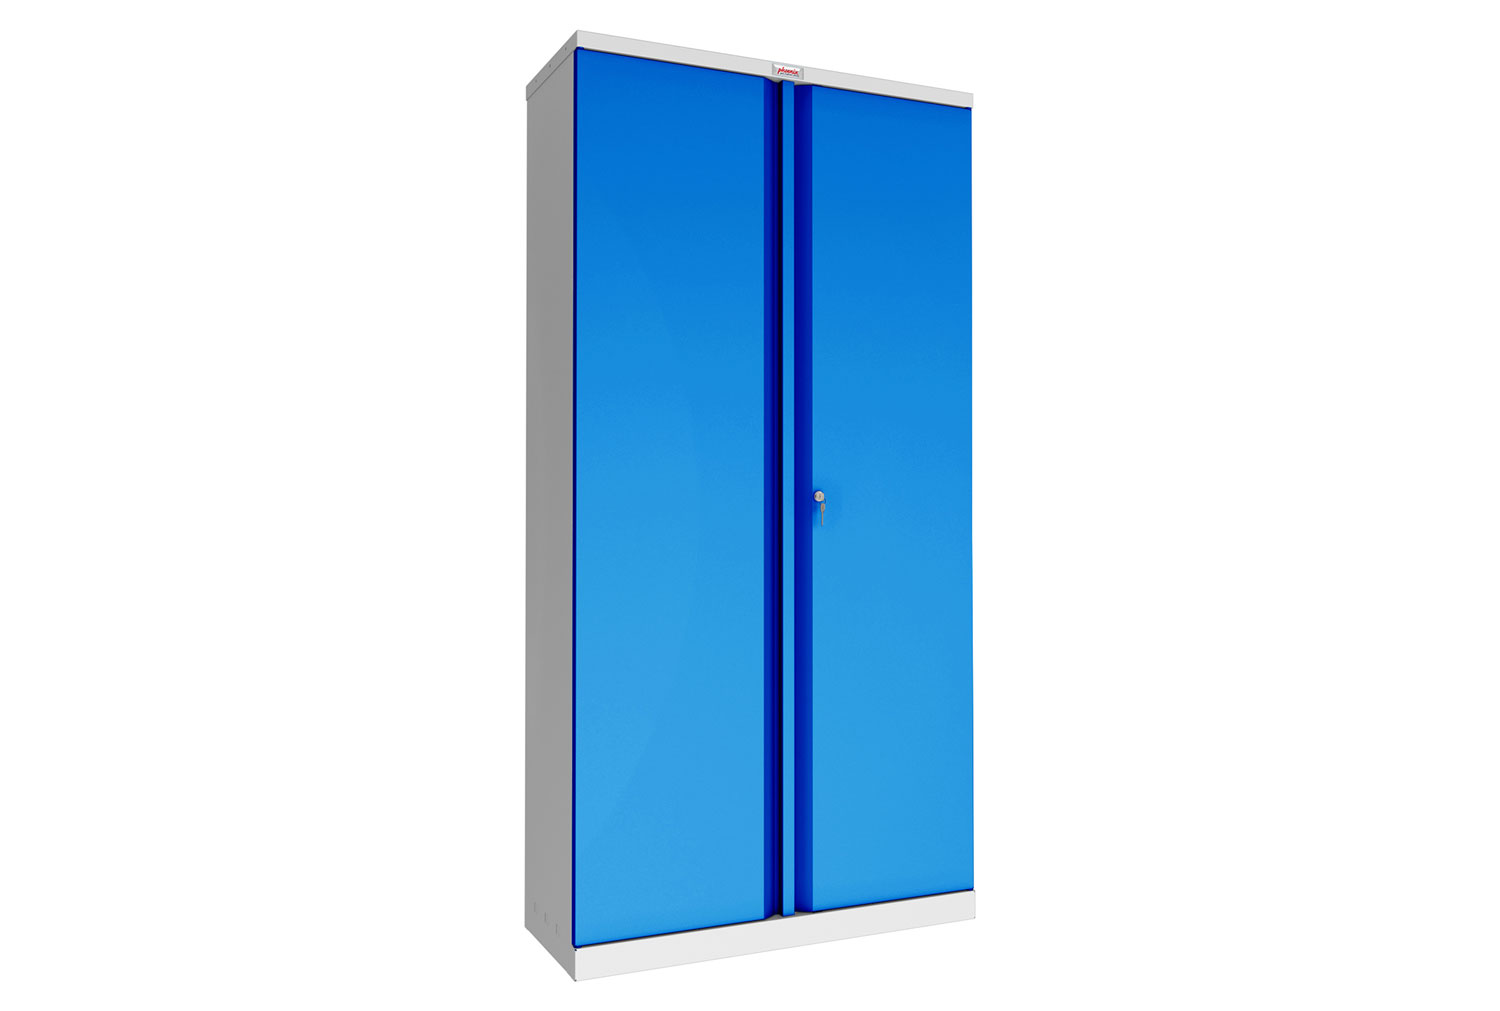 Phoenix SCL Steel Storage Office Cupboards With Key Lock, 4 Shelf - 92wx37dx183h (cm), Blue, Express Delivery